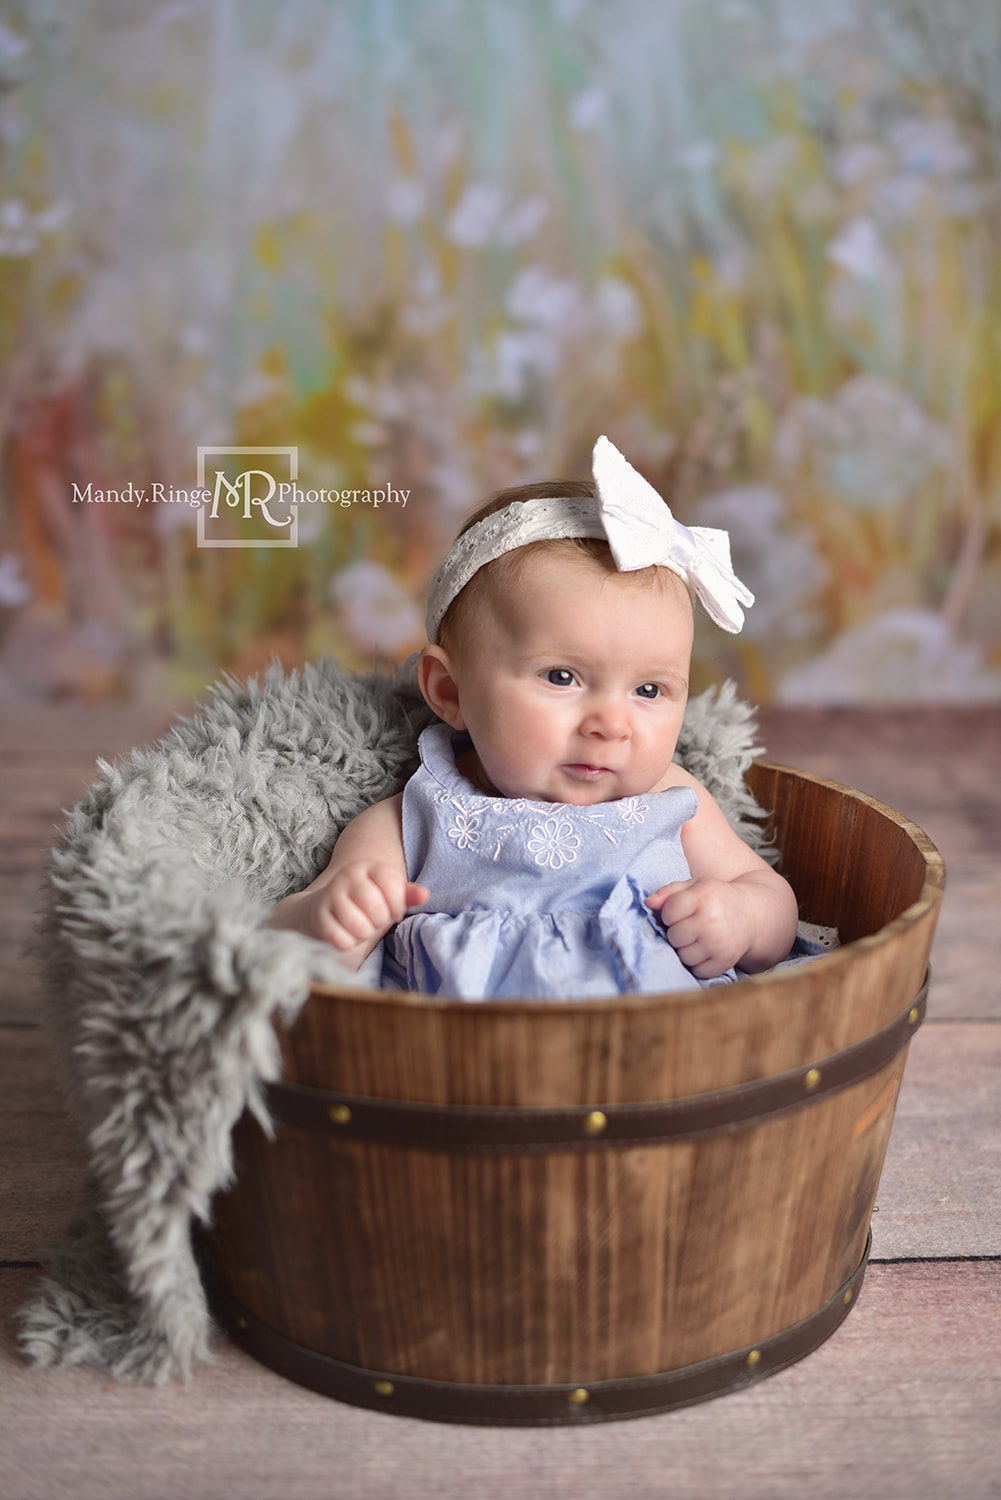 3 month old girl portraits // St. Charles, IL studio // by Mandy Ringe Photography